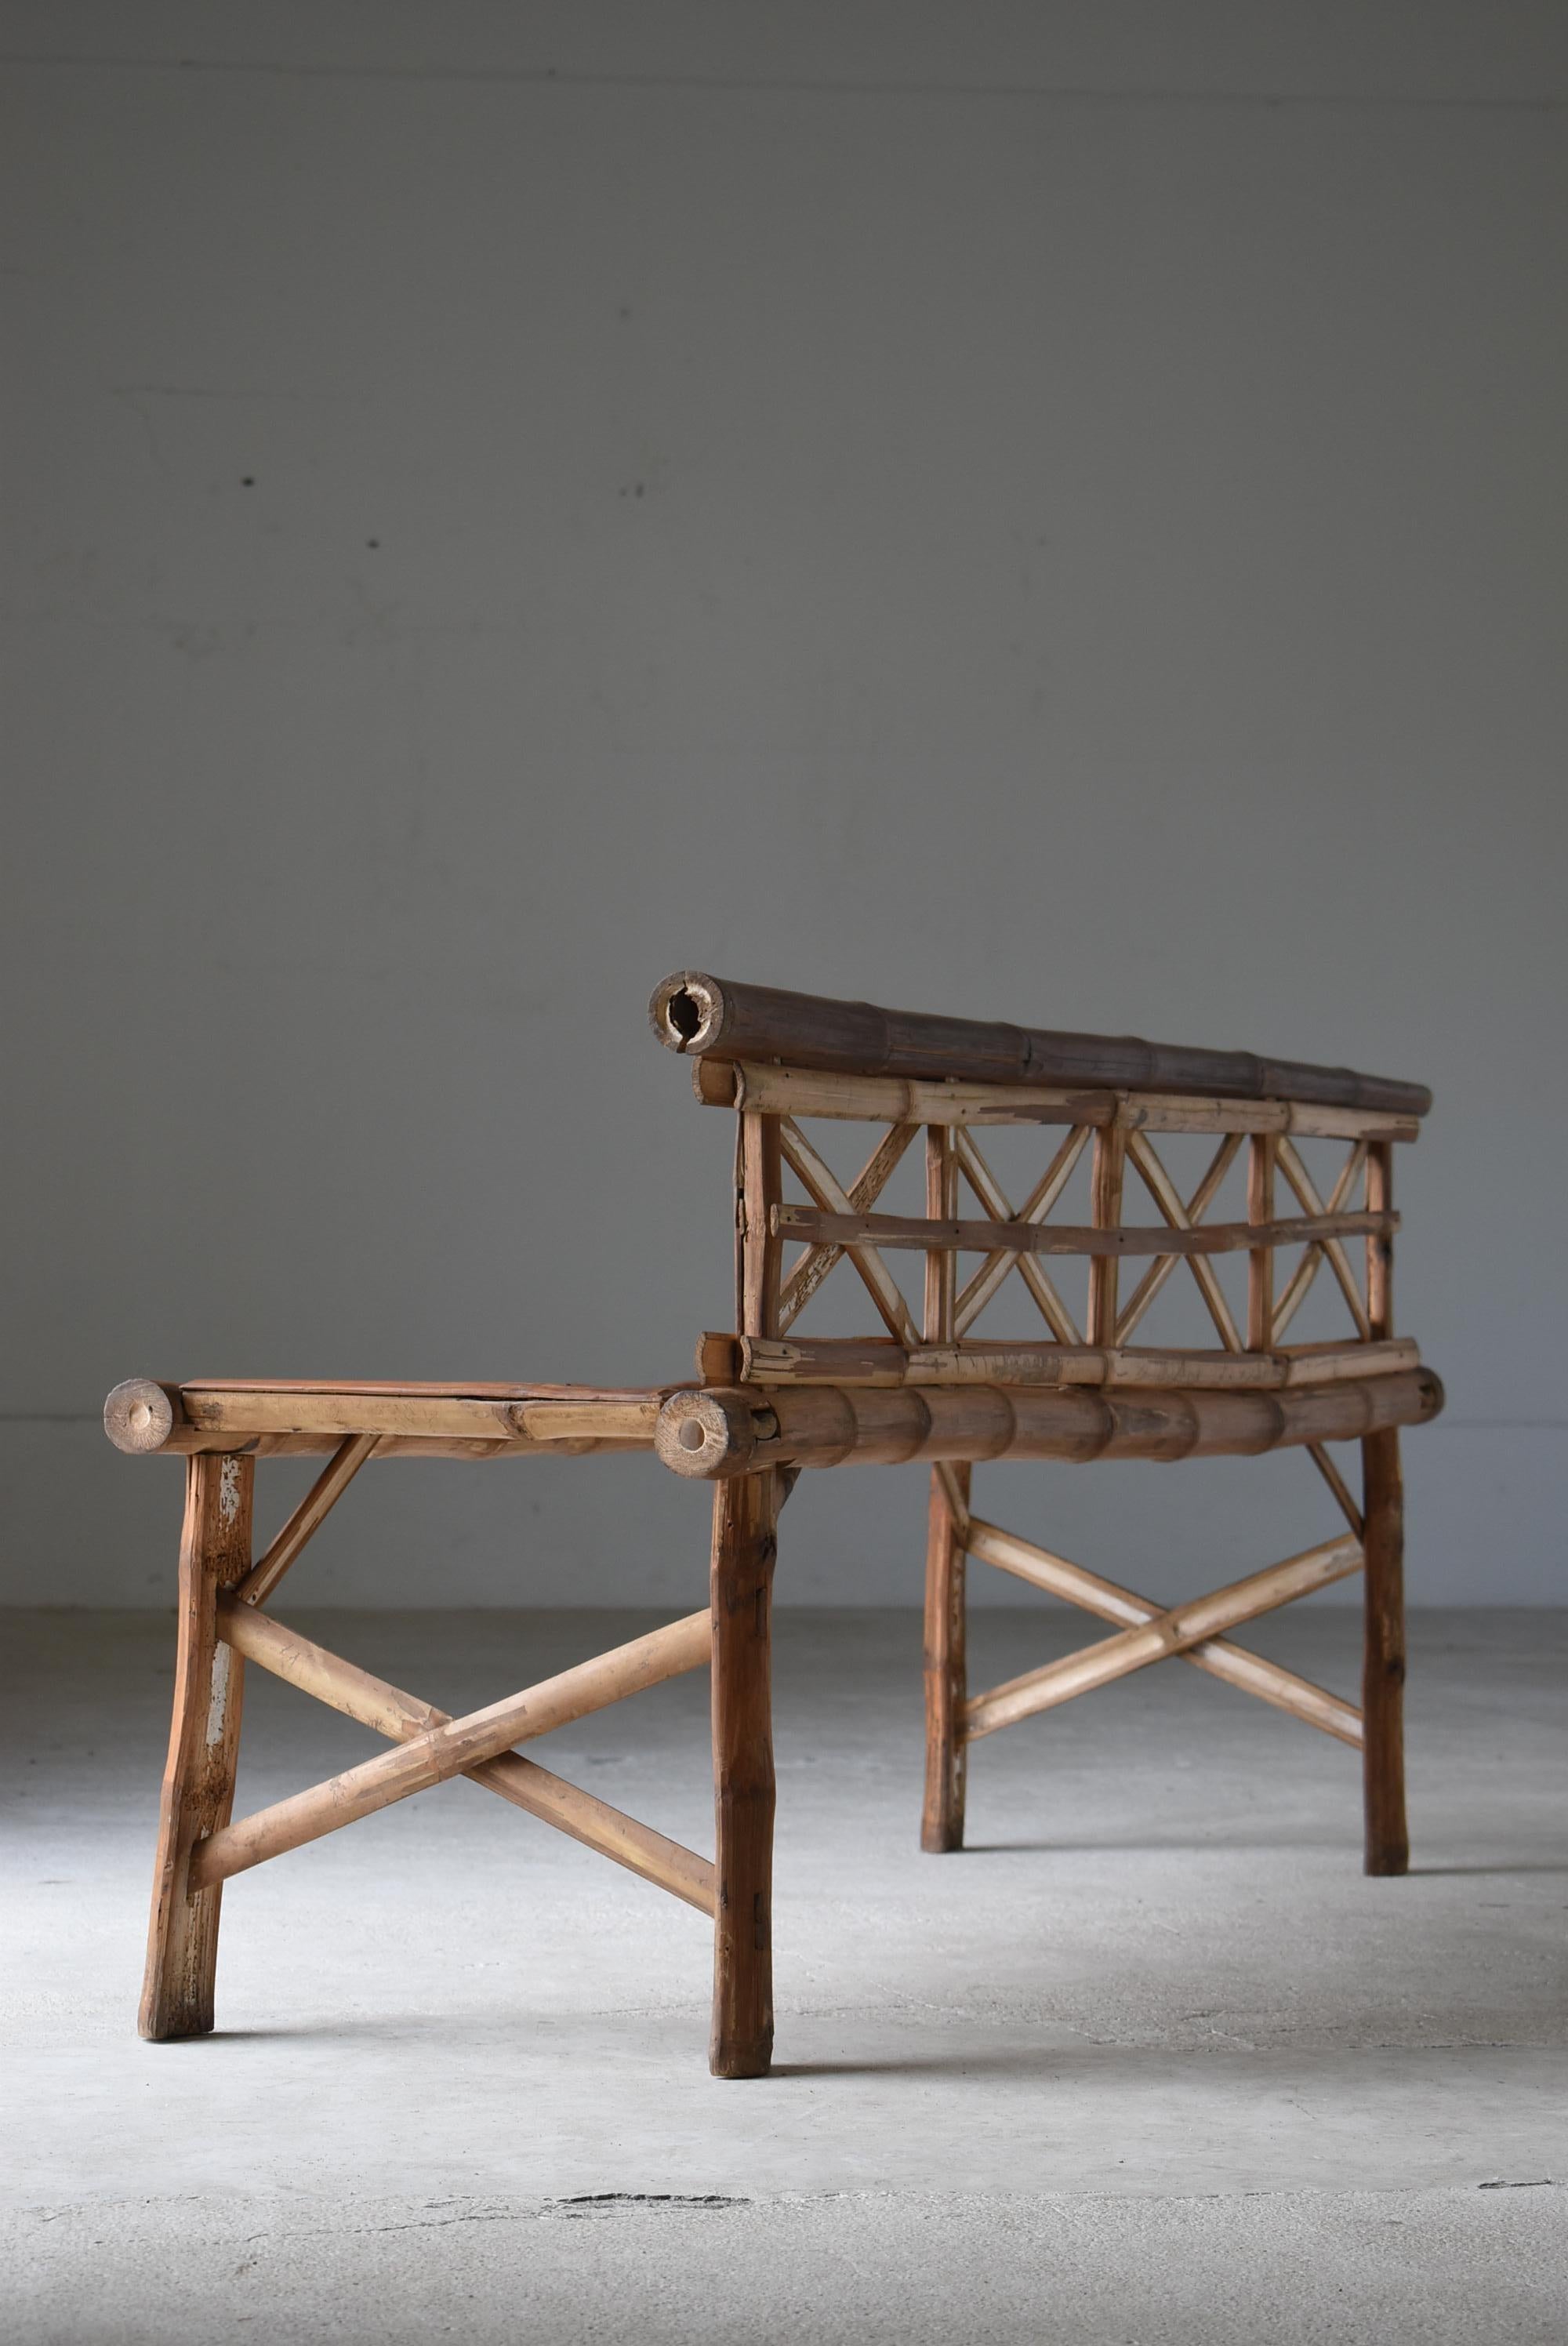 Japanese Old Bamboo Bench 1940s-1960s / Long Chair Mingei Wabisabi 8